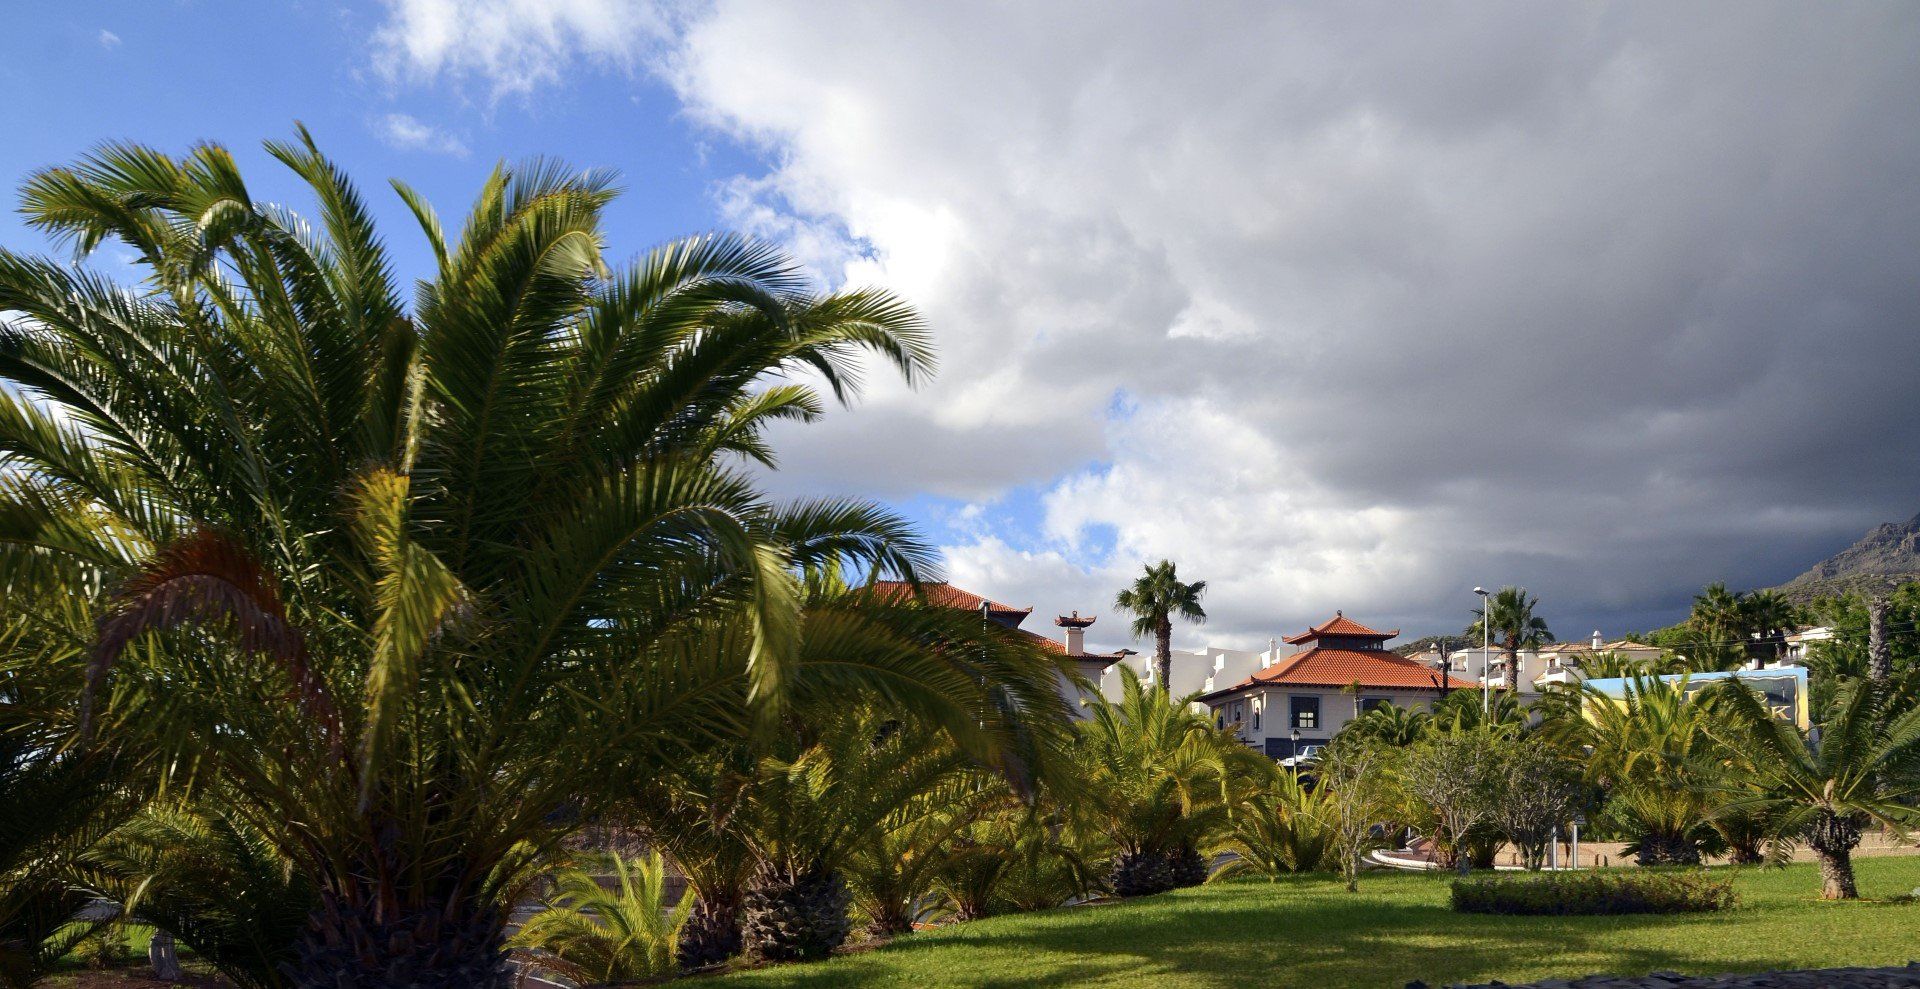 Lush greenery typically found in Tenerife's Arona district